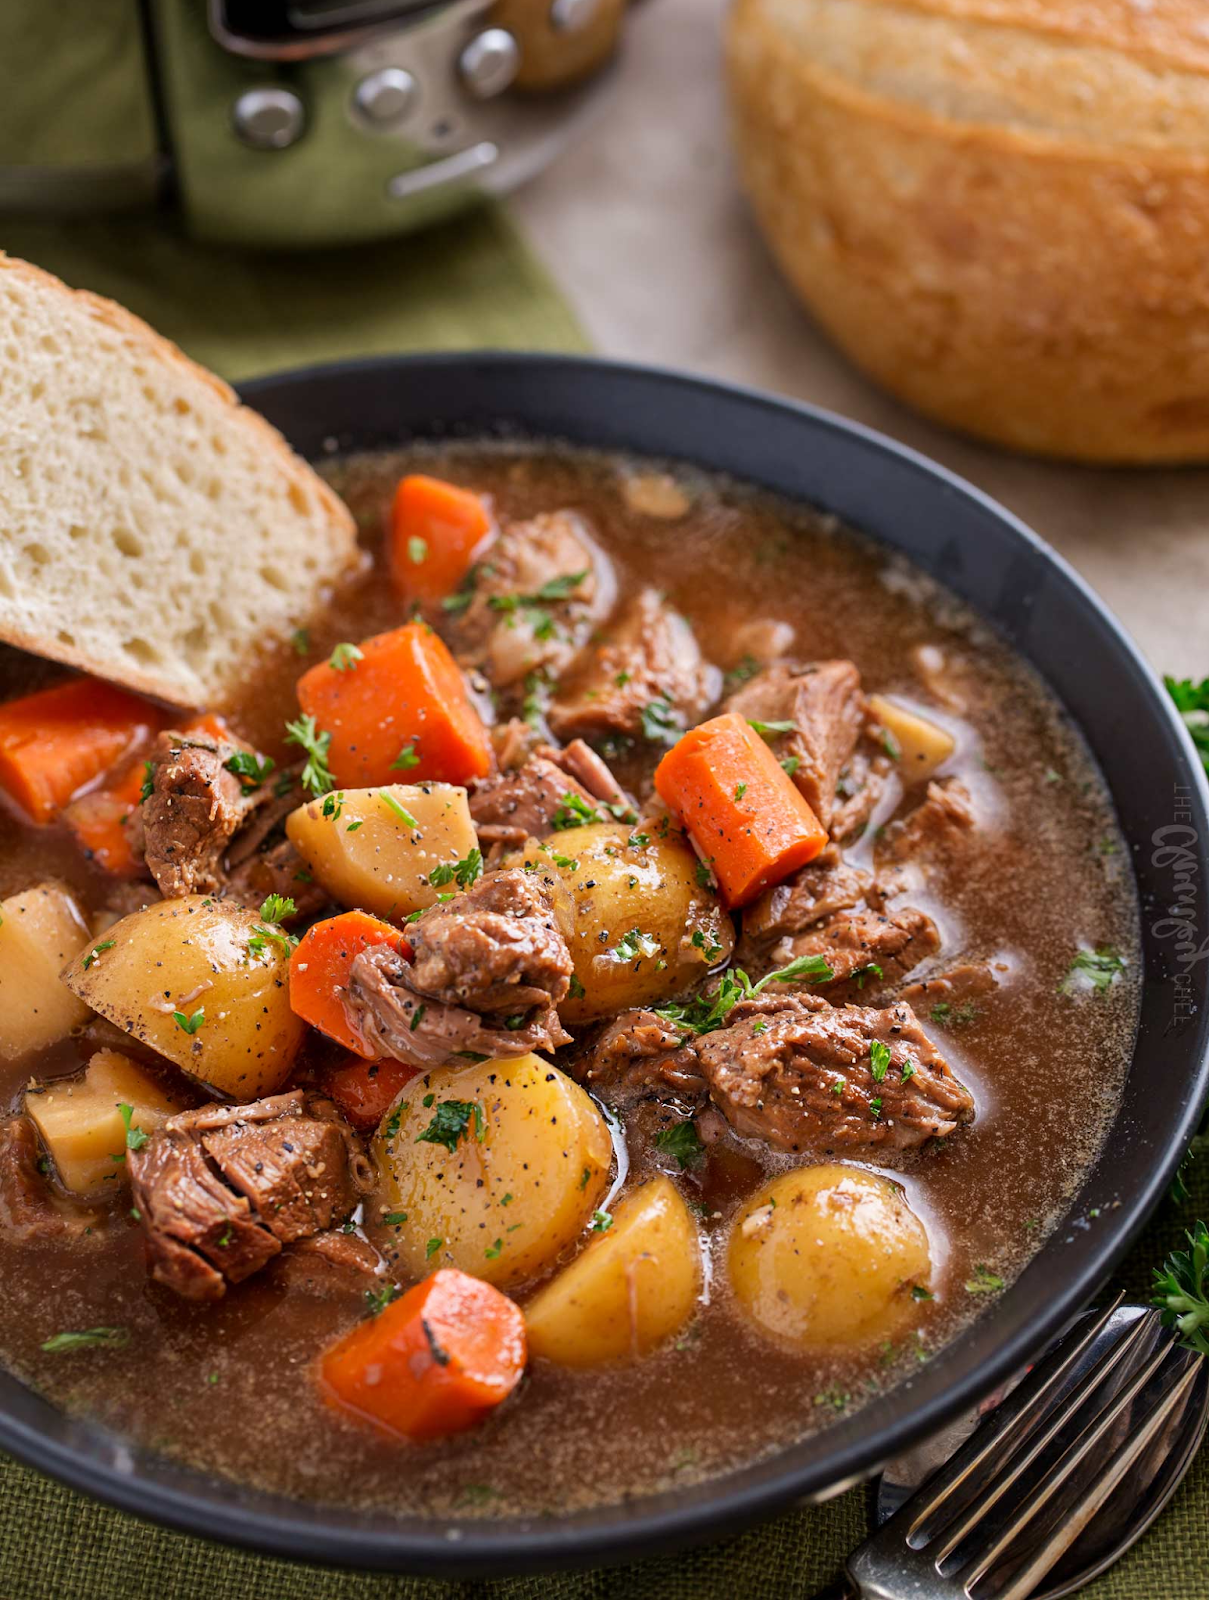 BEER AND HORSERADISH SLOW COOKER BEEF STEW - THE COUNTRY FOOD